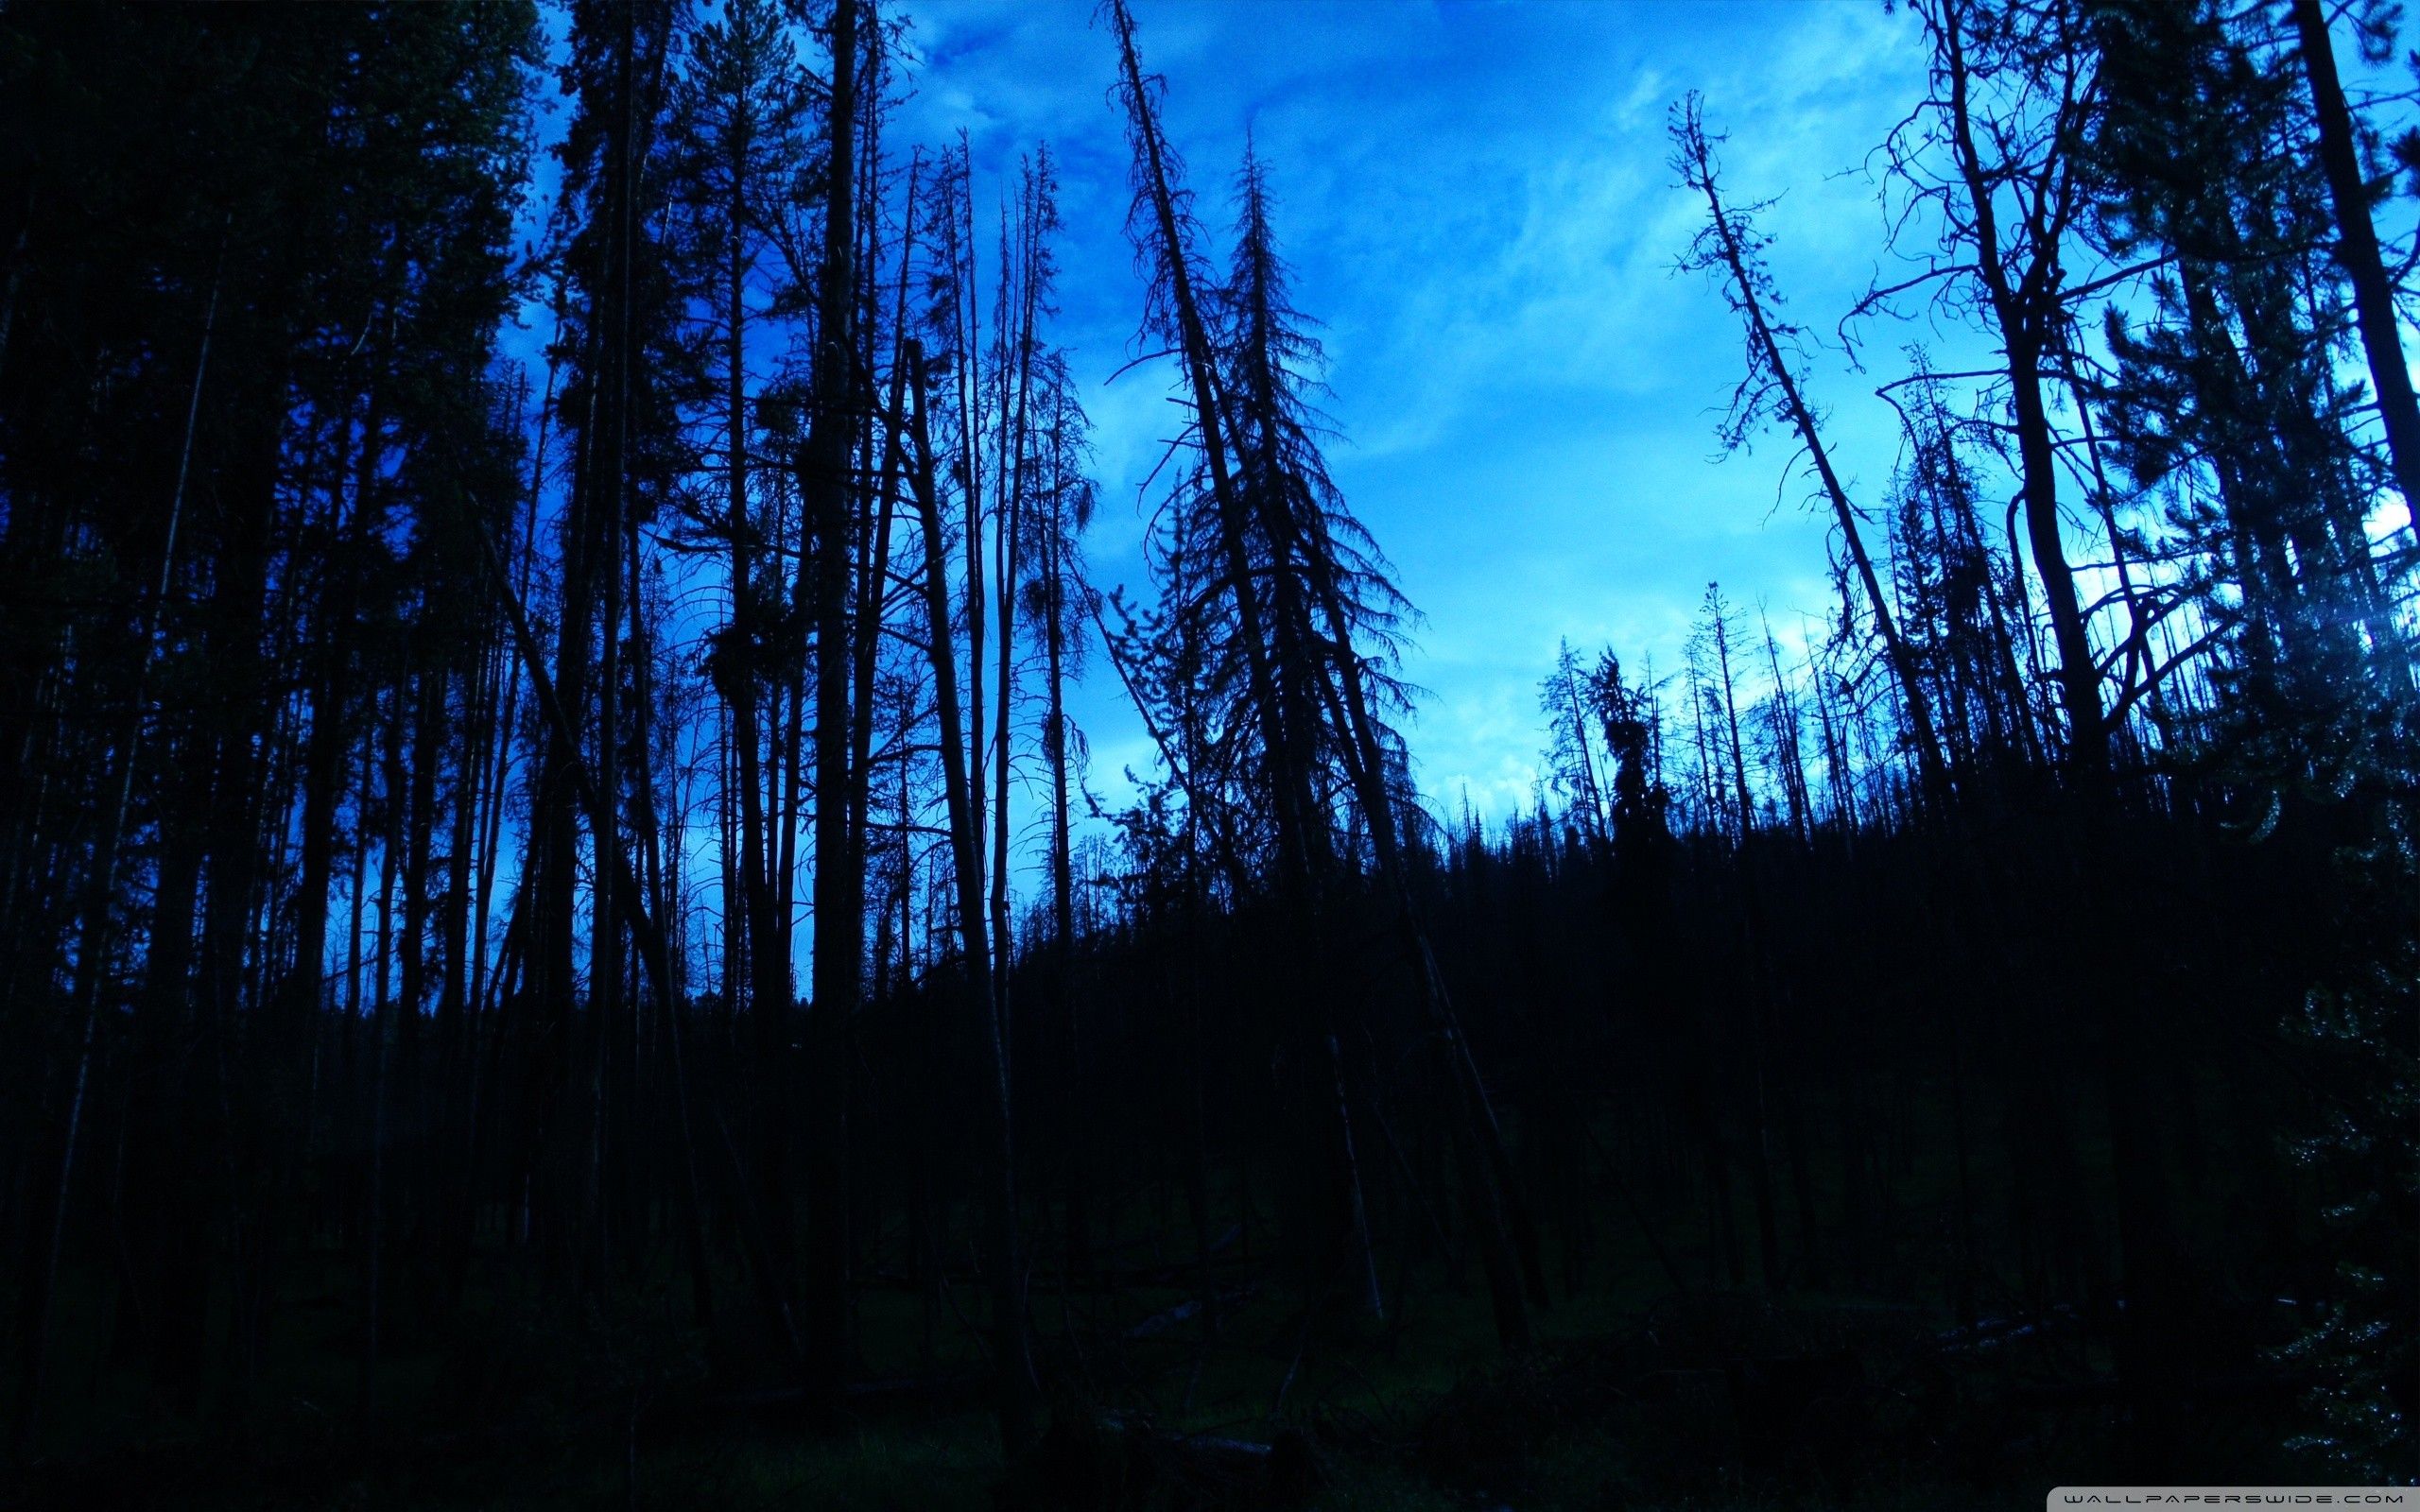 Blue hair in the night forest - wide 5